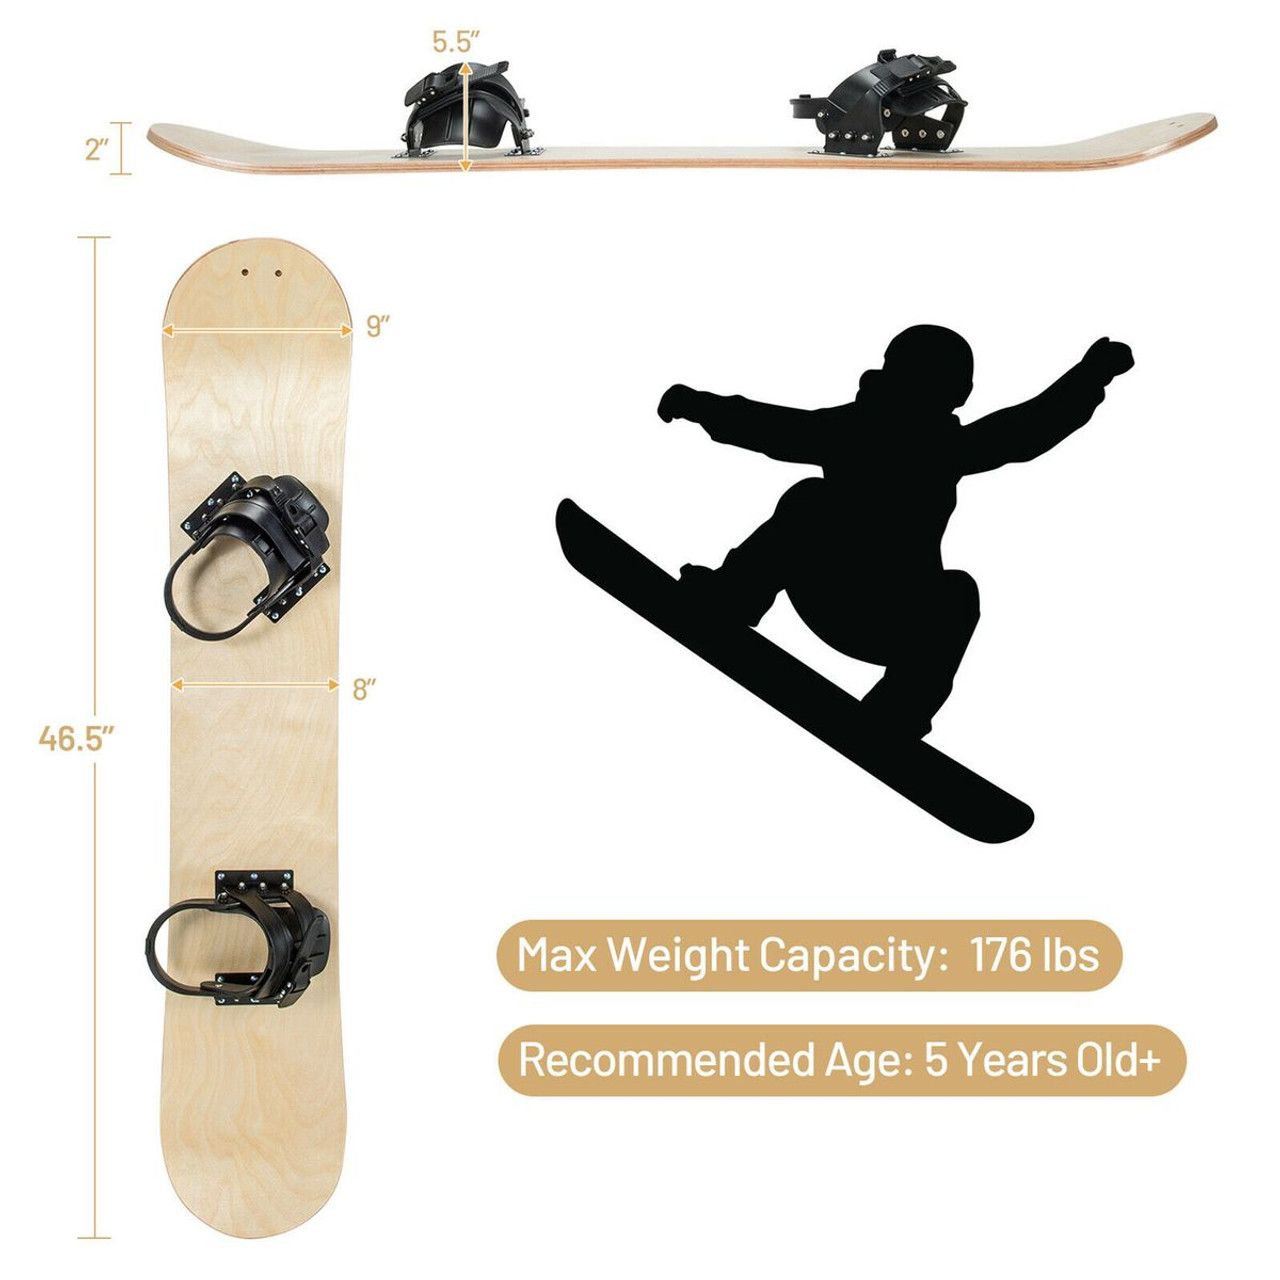 Beginners' Snowboard with Adjustable Foot Straps product image